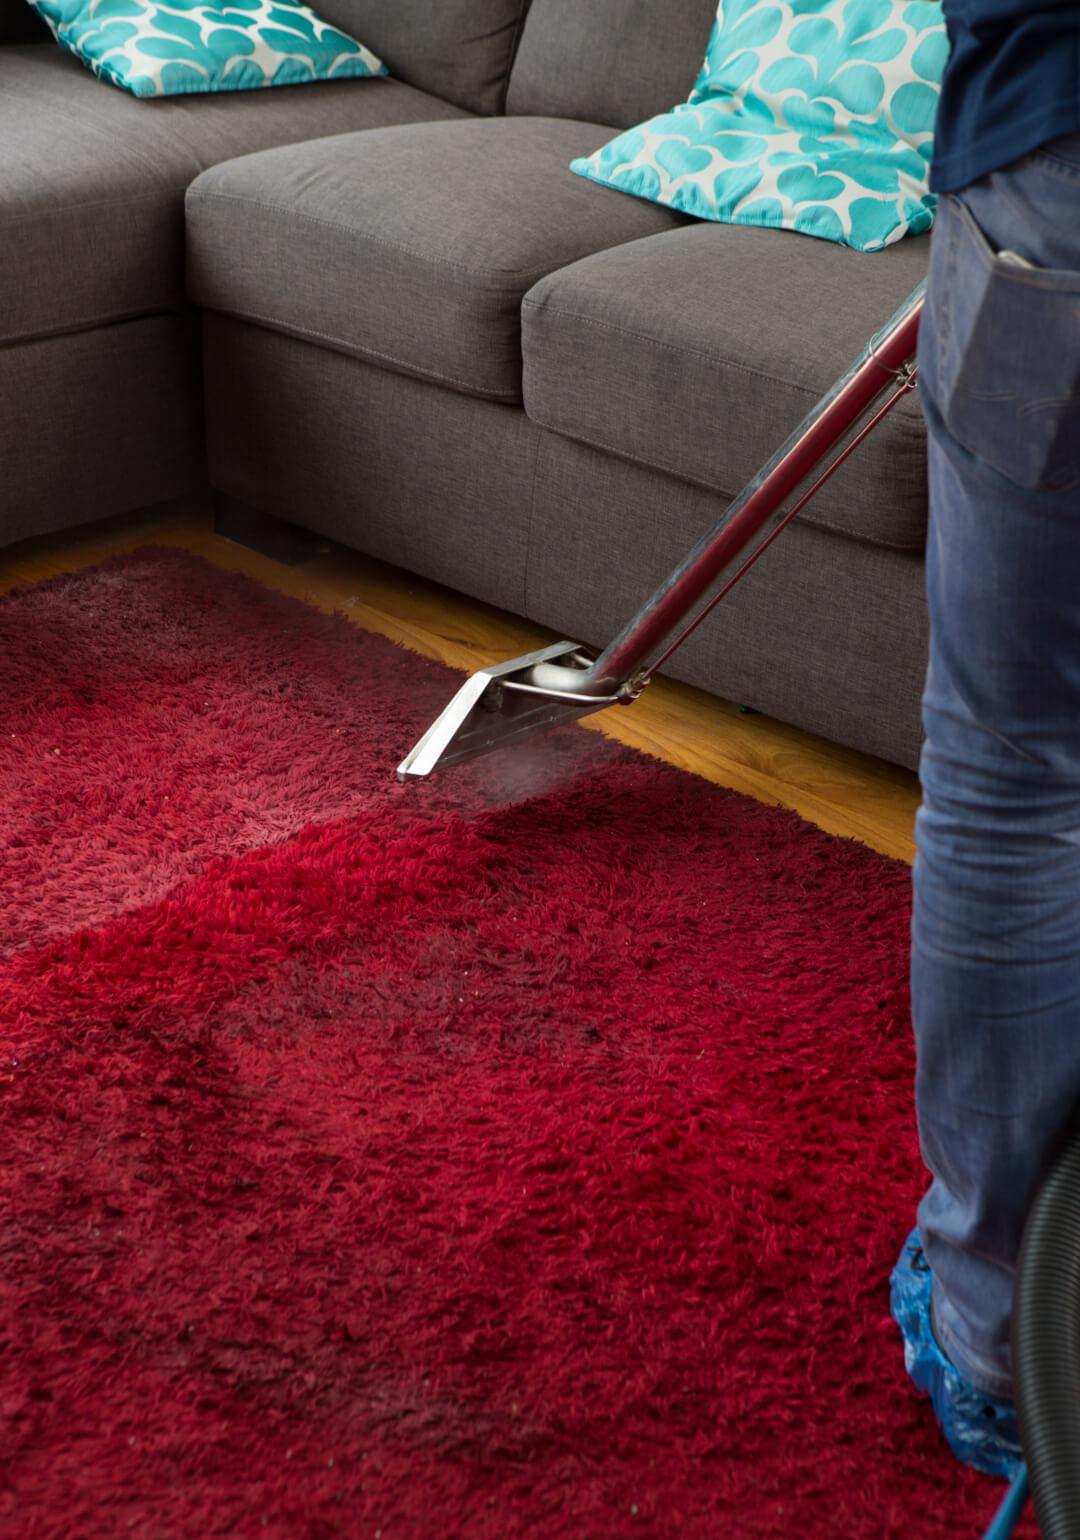 Carpet Cleaning with professional machines